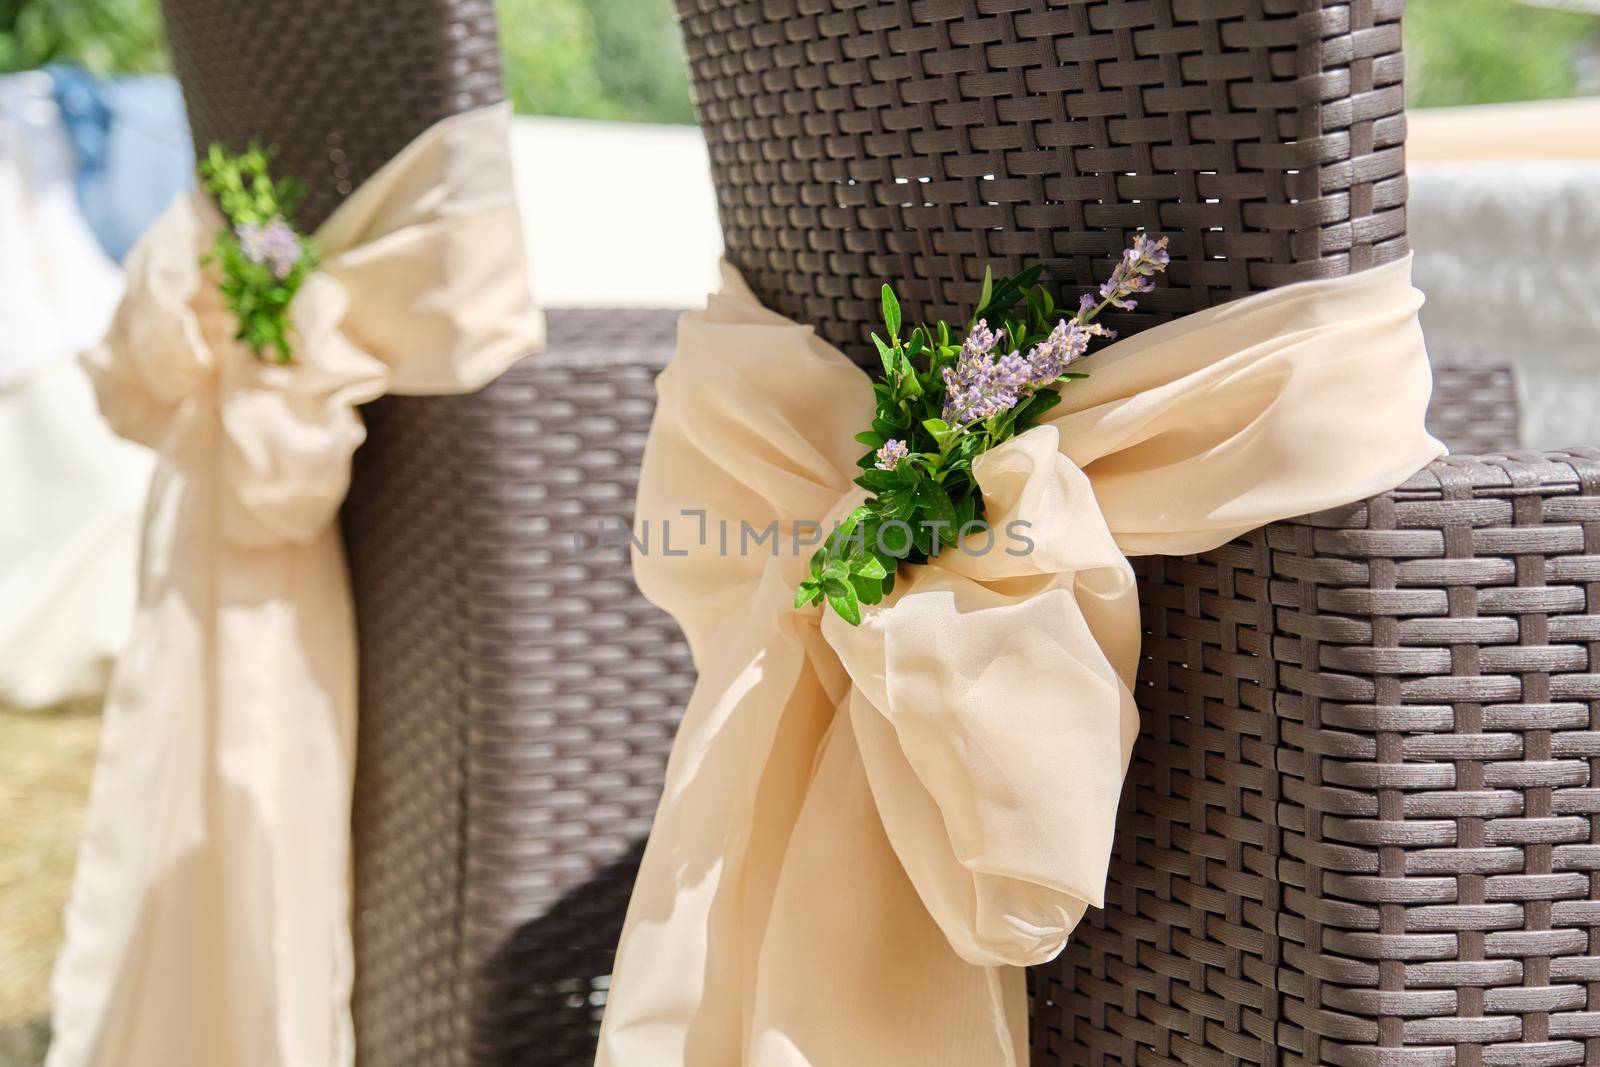 Close-up of rattan garden chairs decorated with textiles with flowers for a party, ceremony.